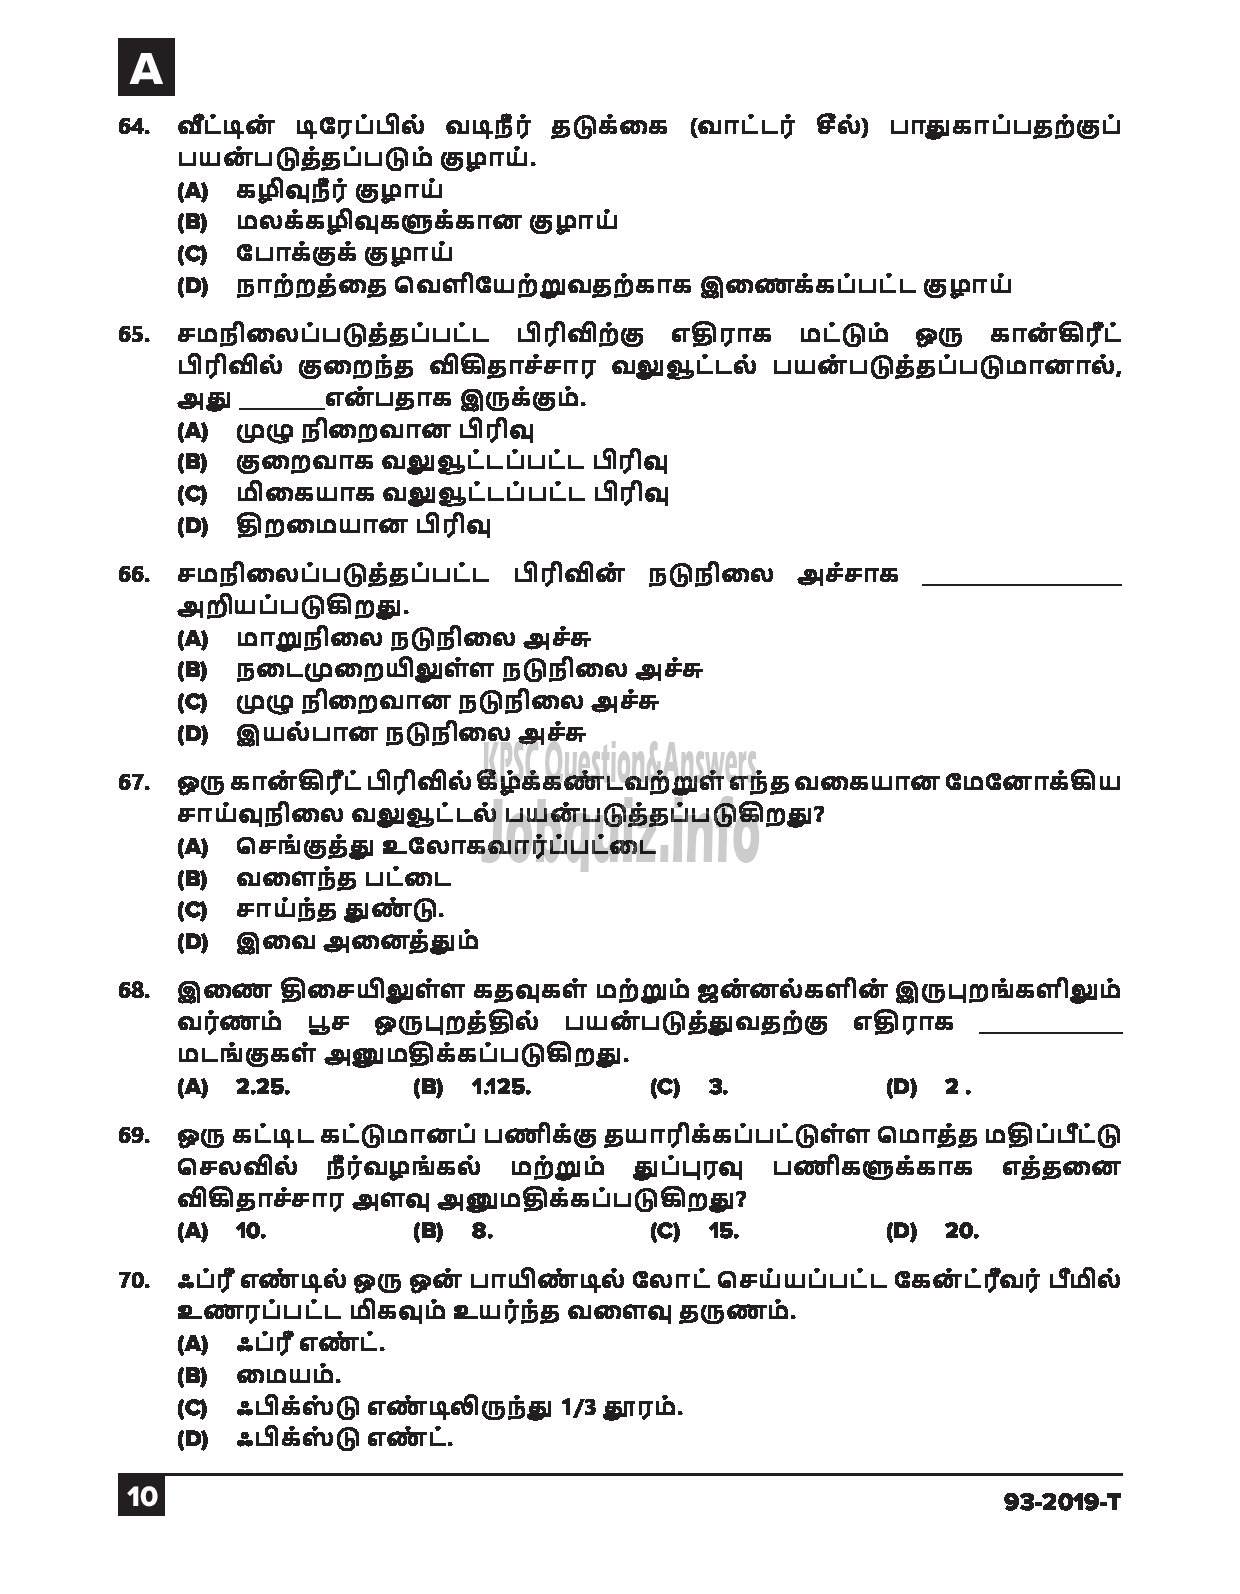 Kerala PSC Question Paper - Workshop Attender (Architectural Assistant) SR From SC/ST Industrial Training Tamil-10